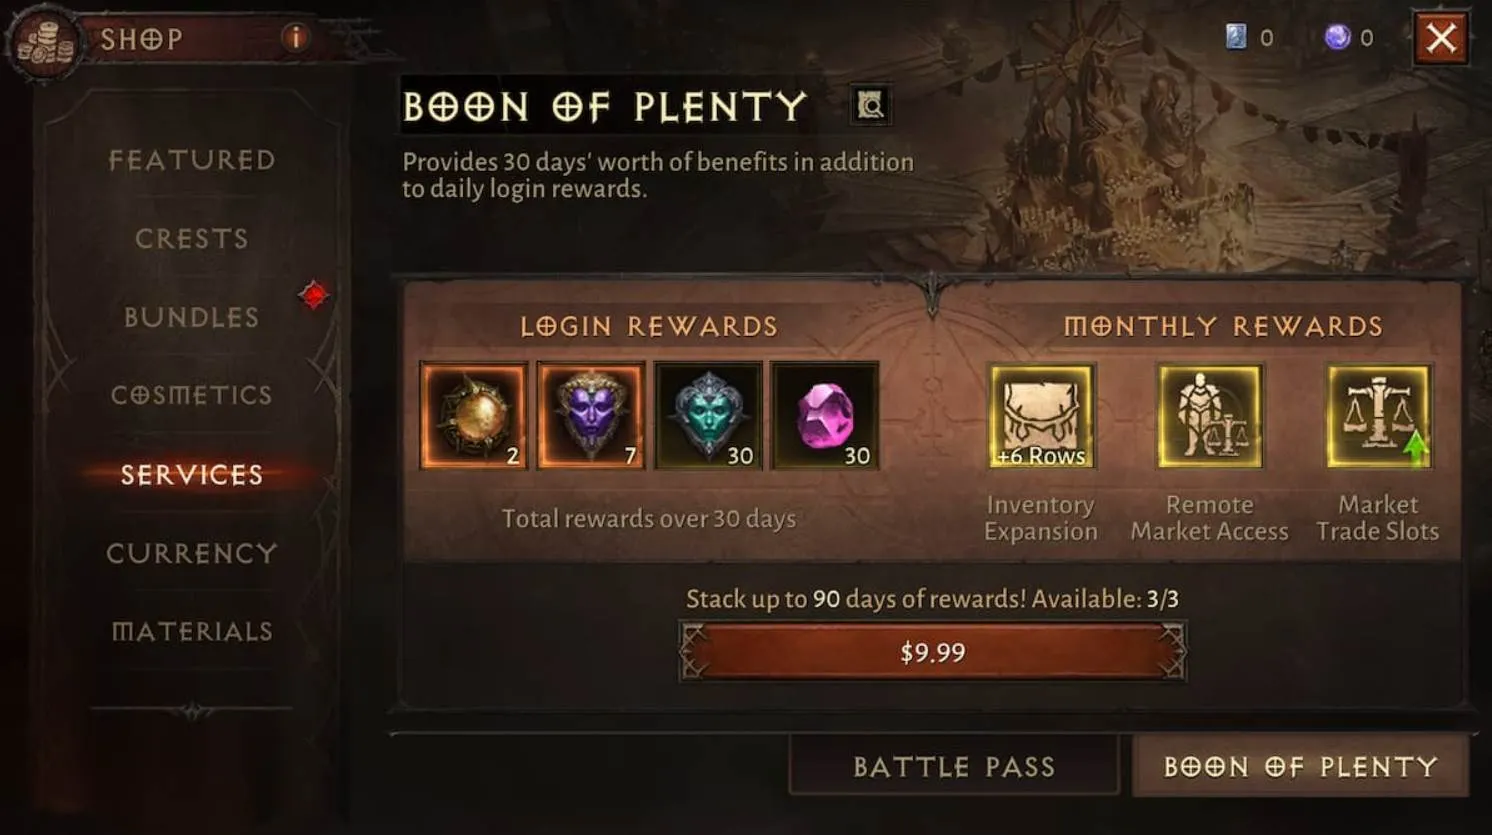 Does Diablo Immortal Have Microtransactions?